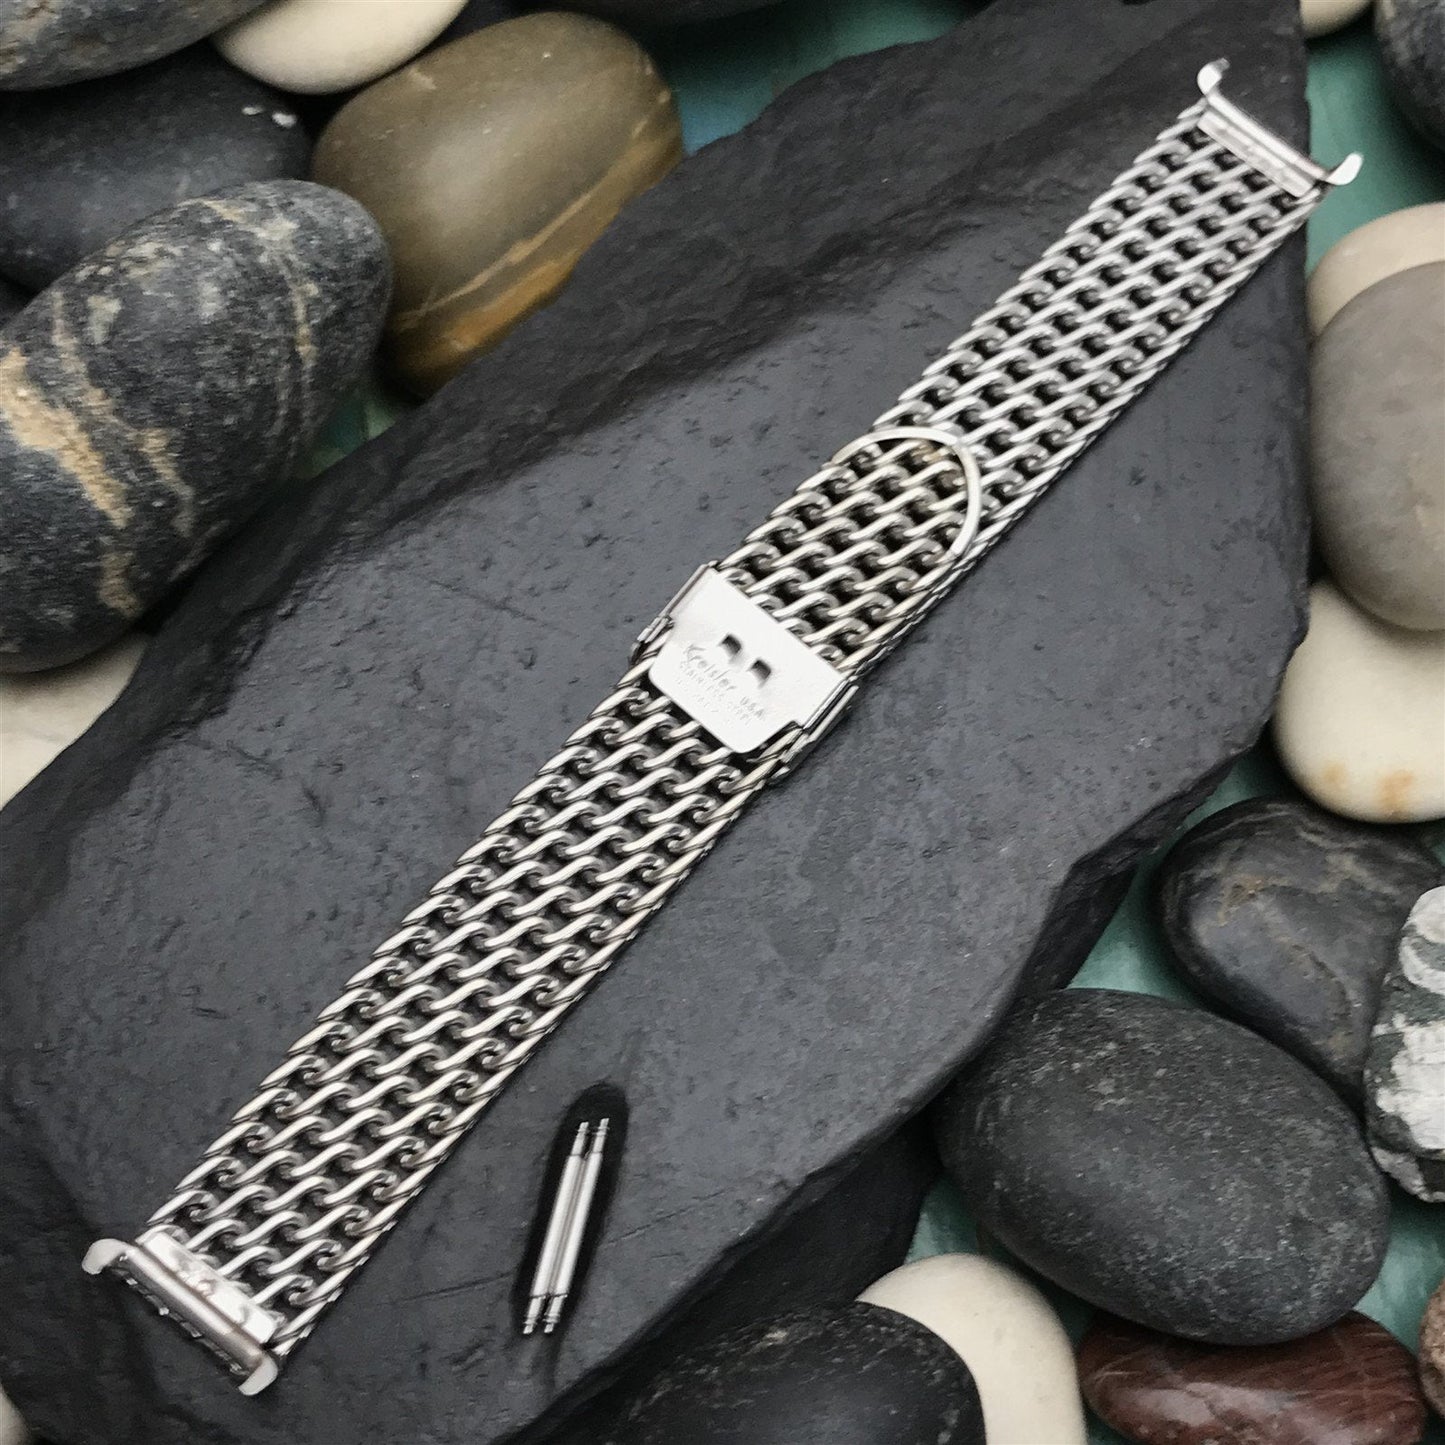 17.2mm Stainless Steel Thick Mesh Kreisler USA 1960s Vintage Watch Band